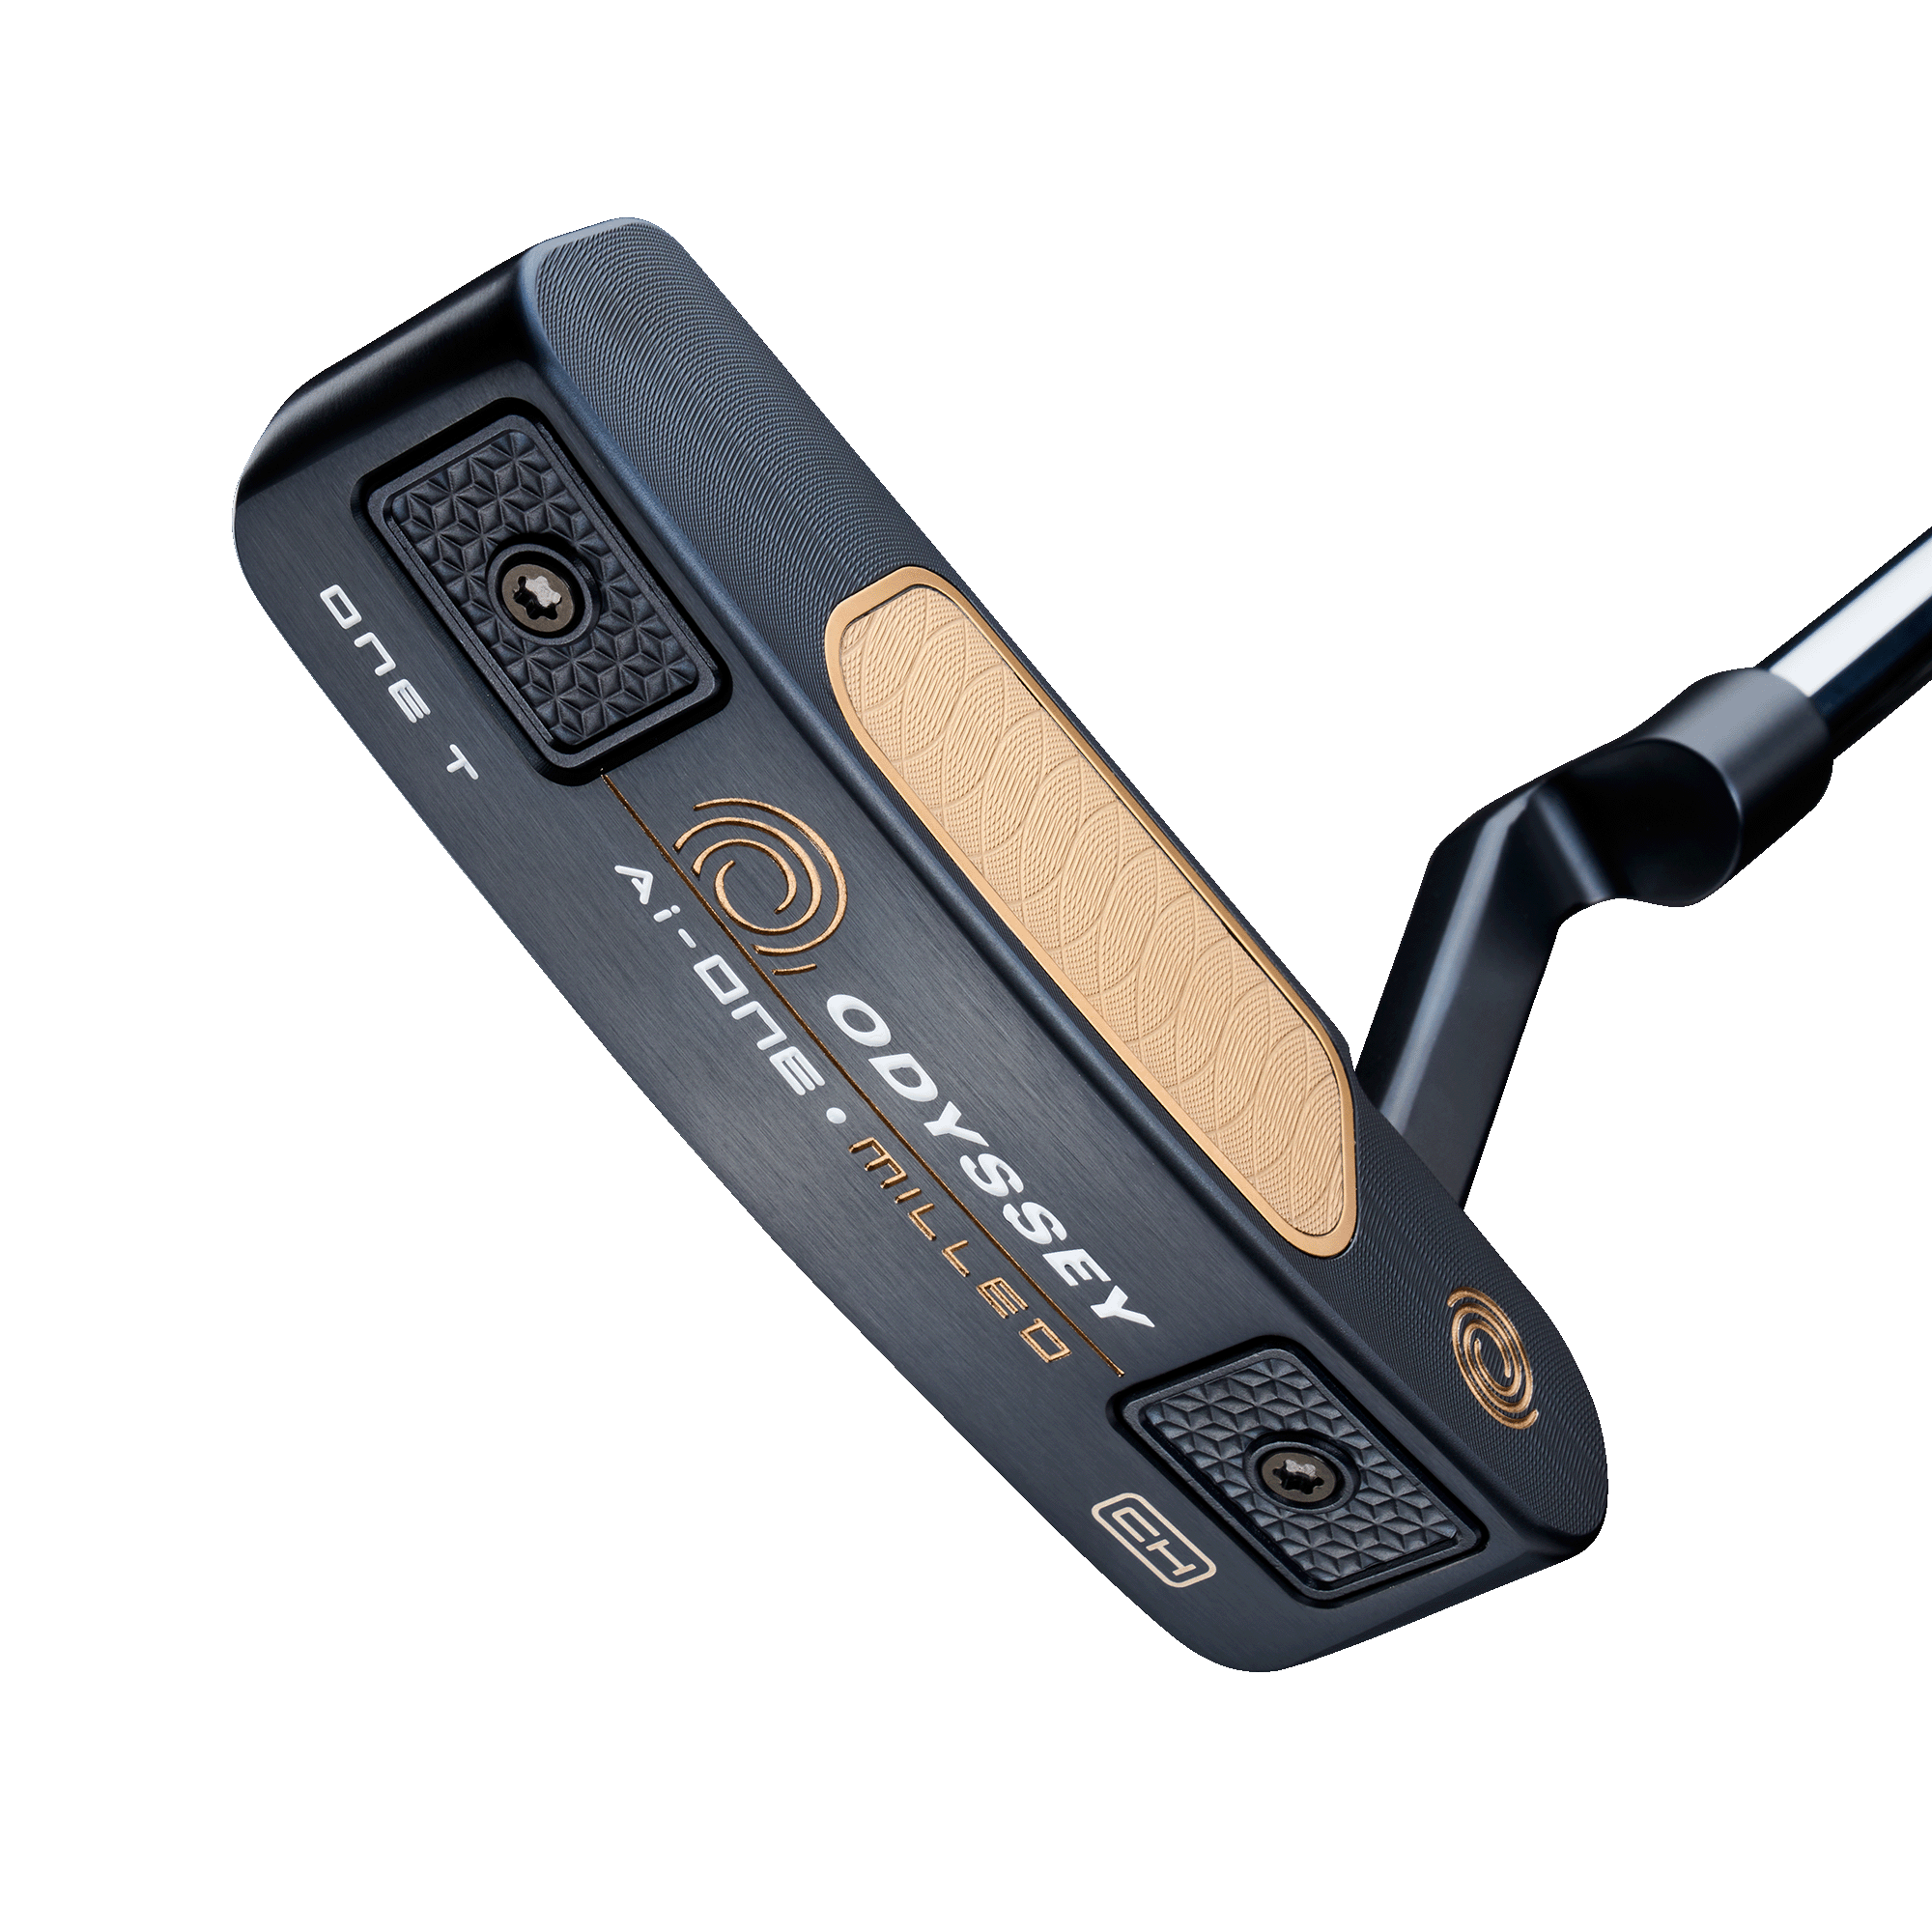 Ai-ONE Milled One T CH Putter